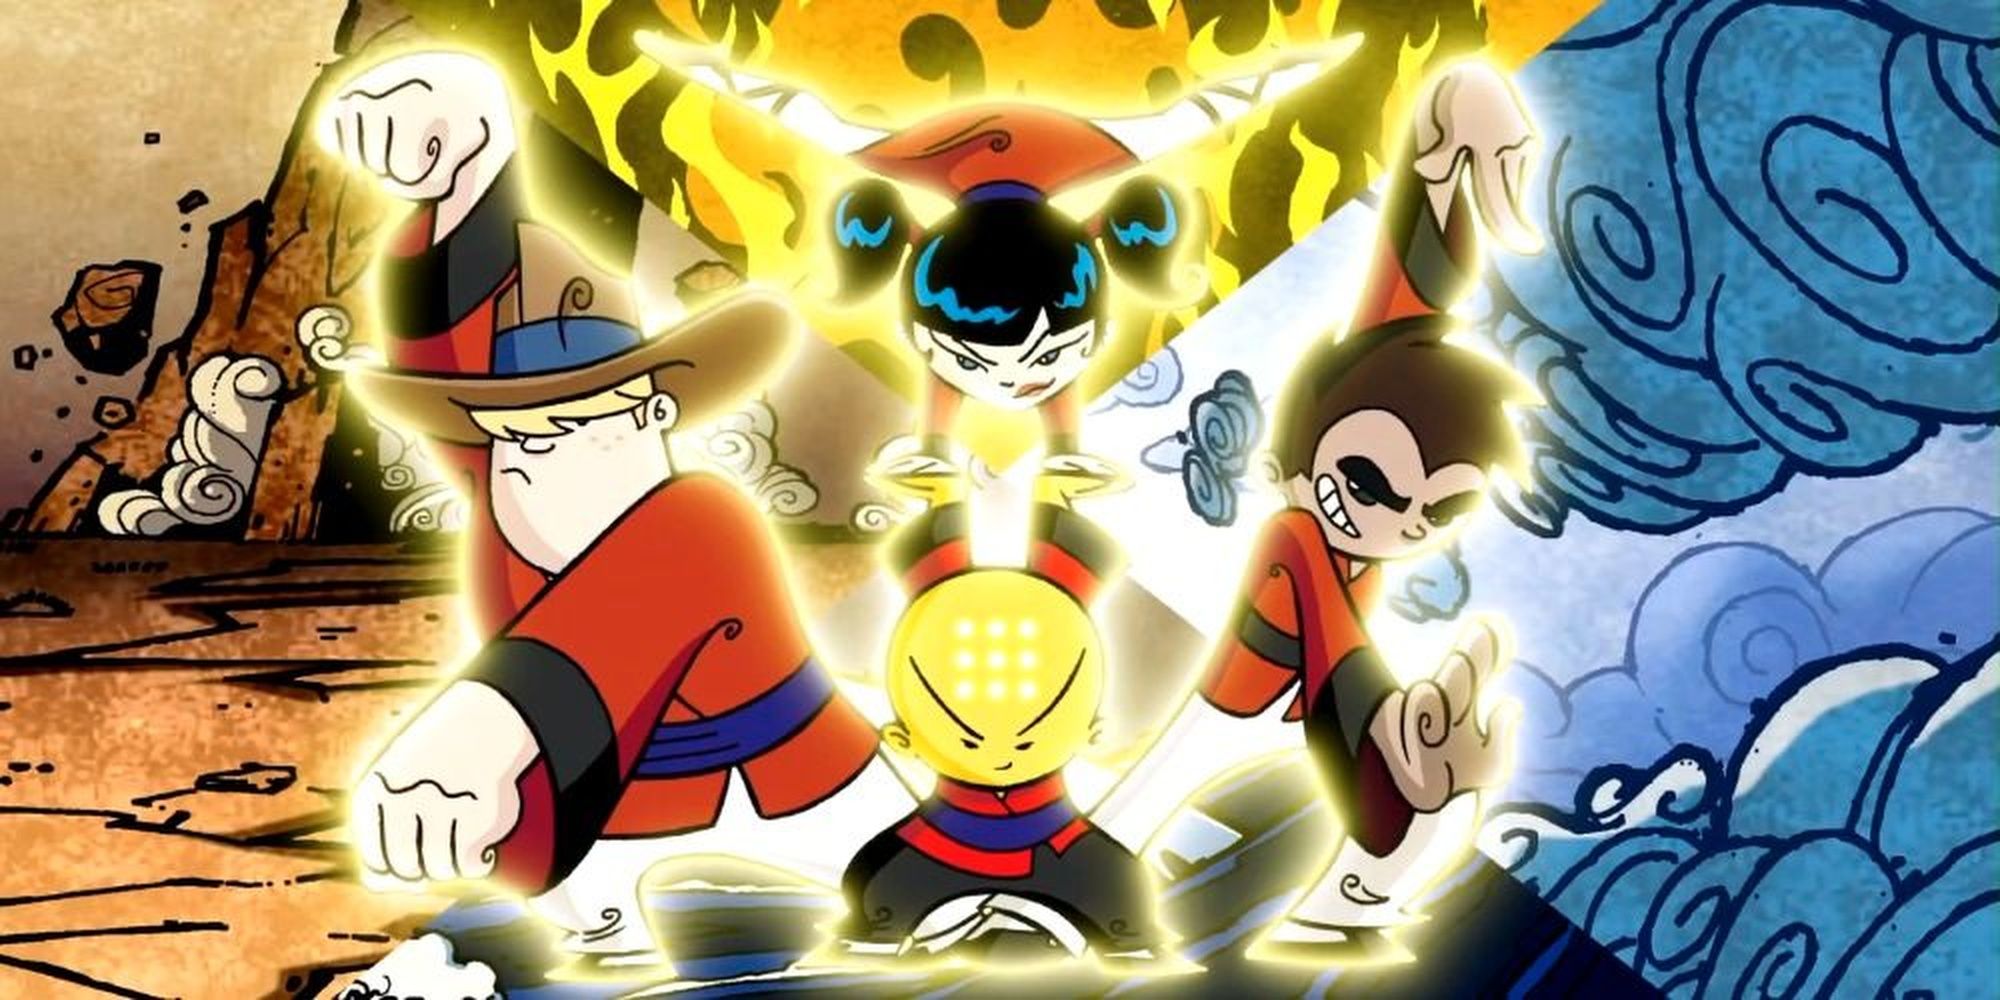 The four heroes of Xiaolin Showdown performing a martial arts move together.